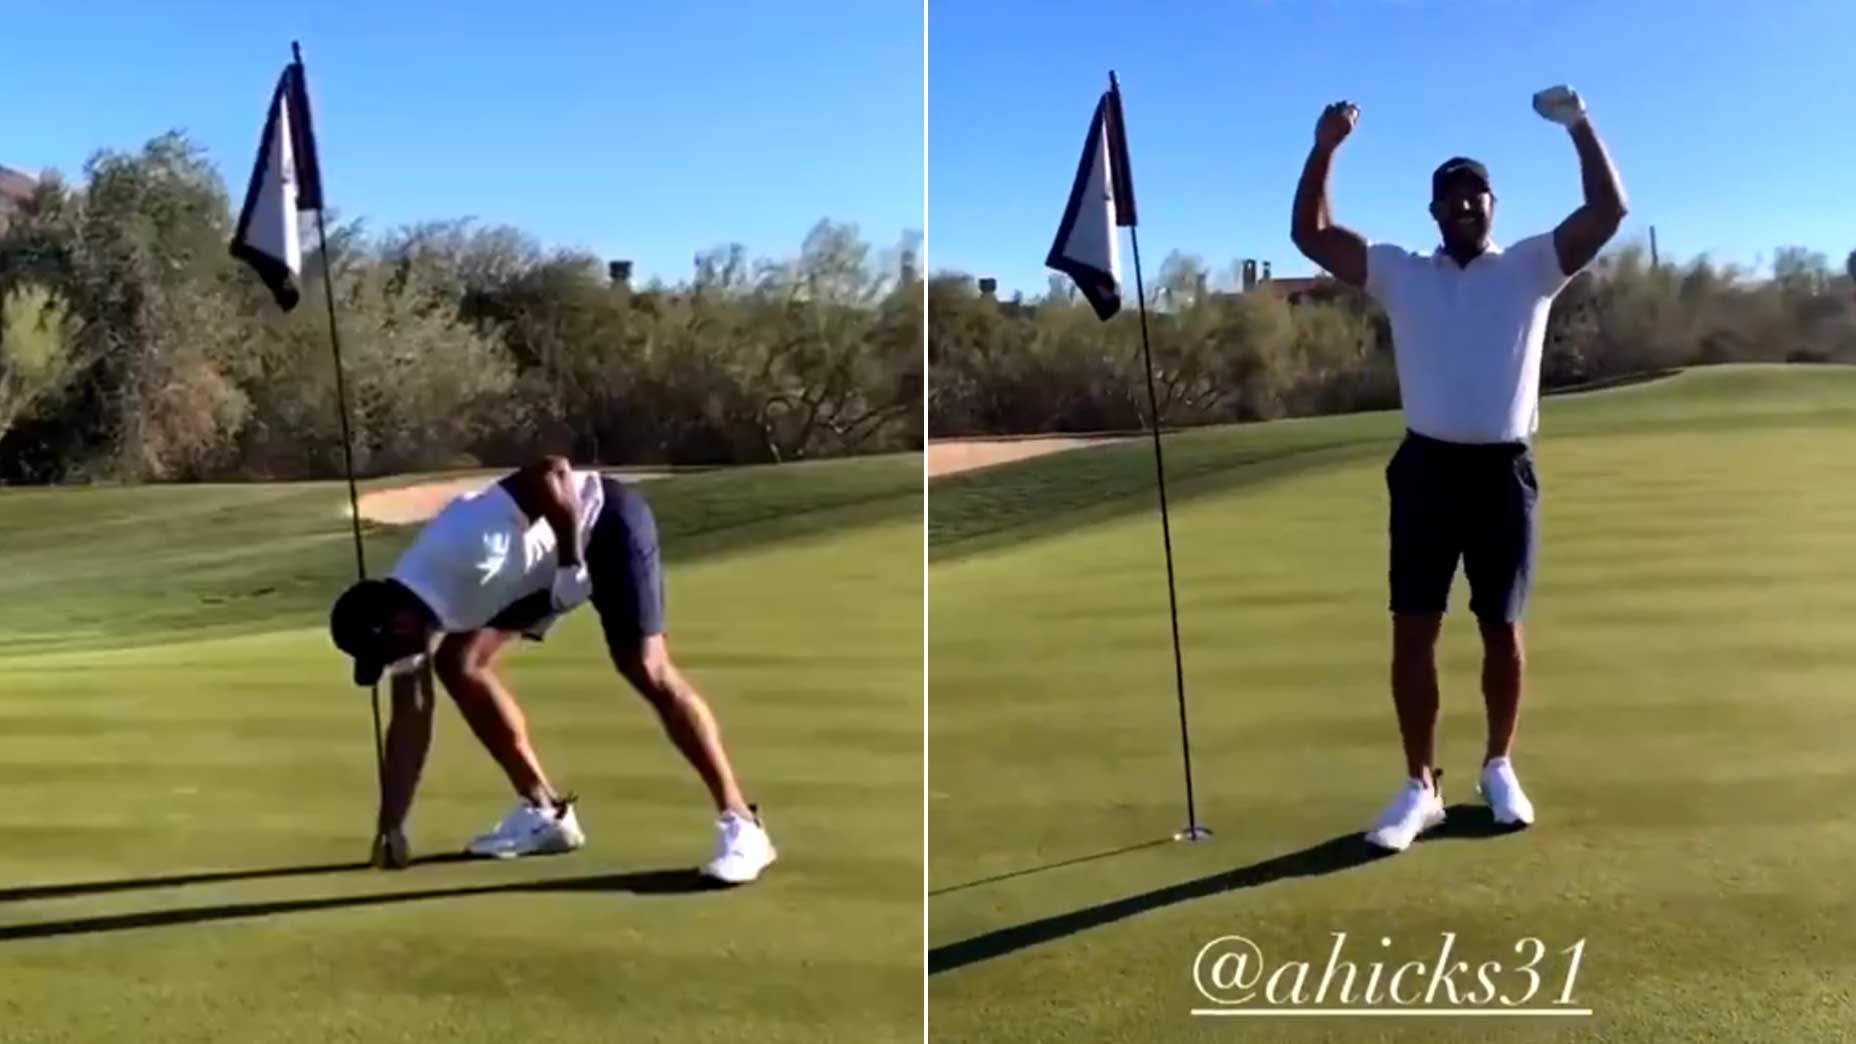 New York Yankees' Aaron Hicks makes hole-in-one on par 4